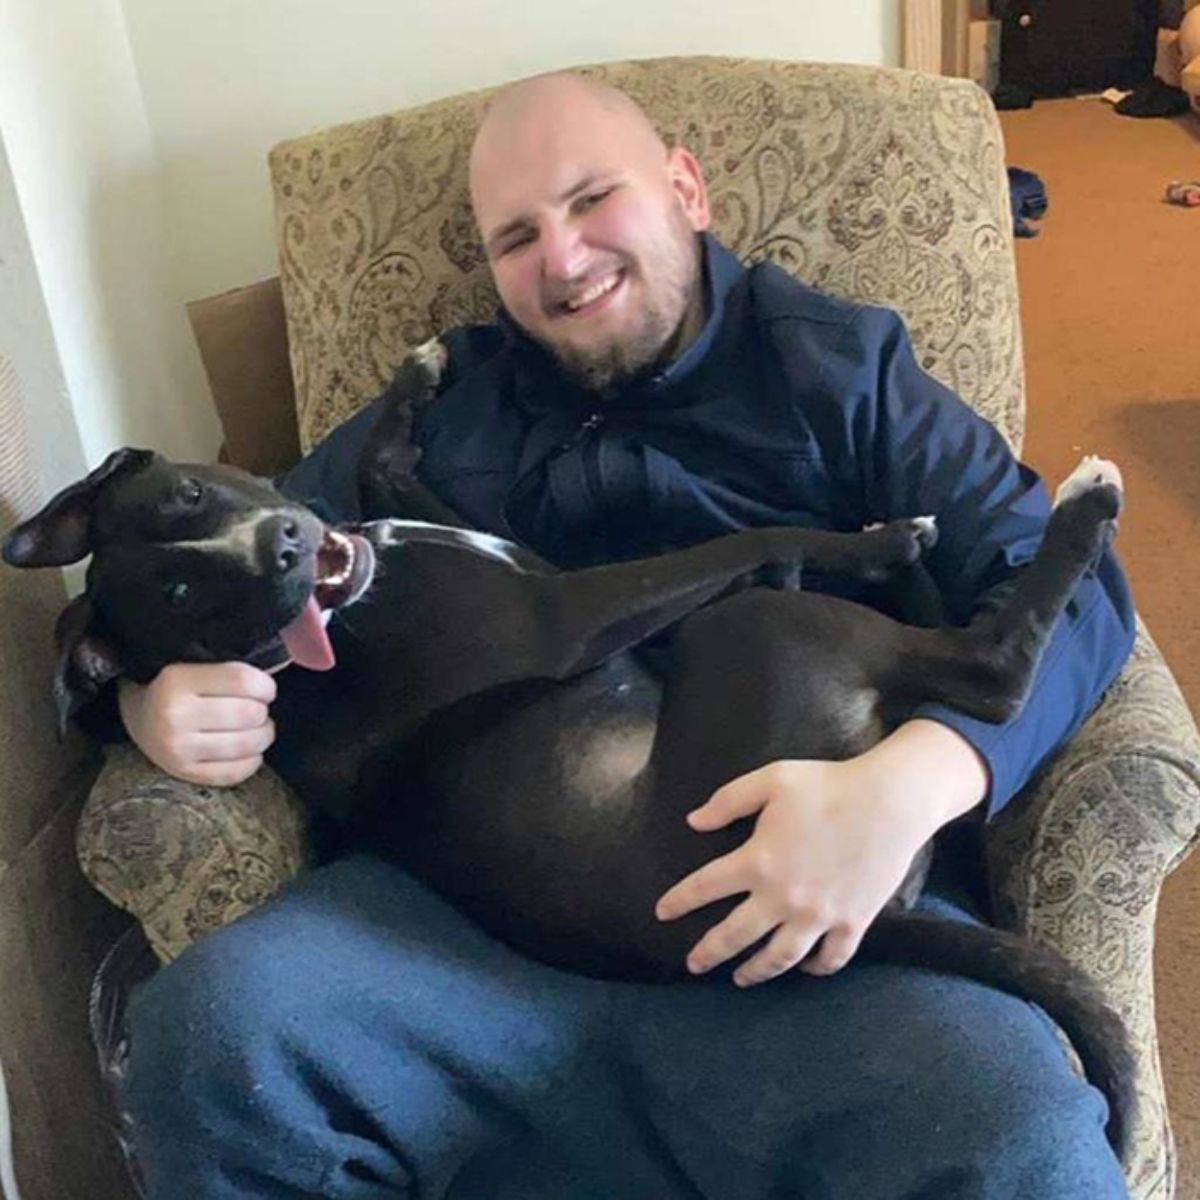 black and white dog with tongue out laying across a man's lap like a baby